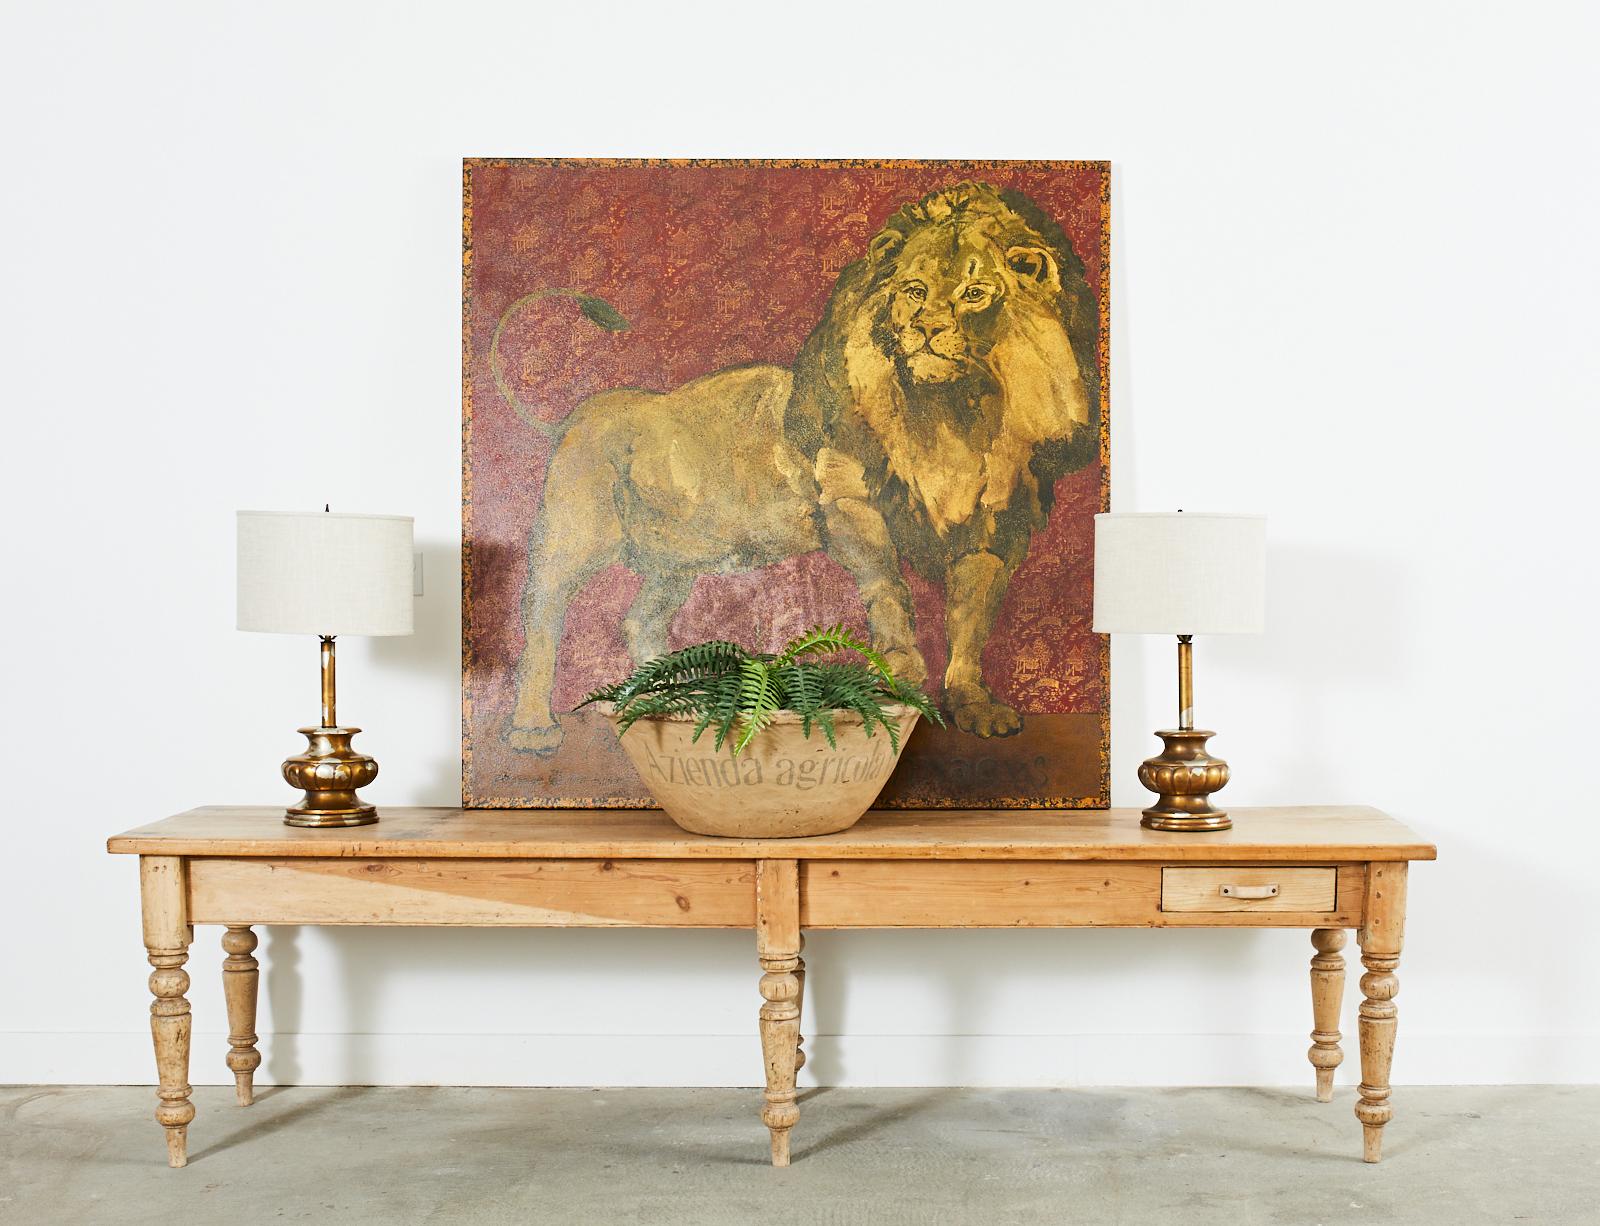 Fantastic large oil on canvas painting by Ira Yeager (American 1938-2022) Pantera Leo depicts an imposing lion in front of an Asian motif chinoiserie decorated background. The ground features intricate gilt pagodas and golden pavilions over a